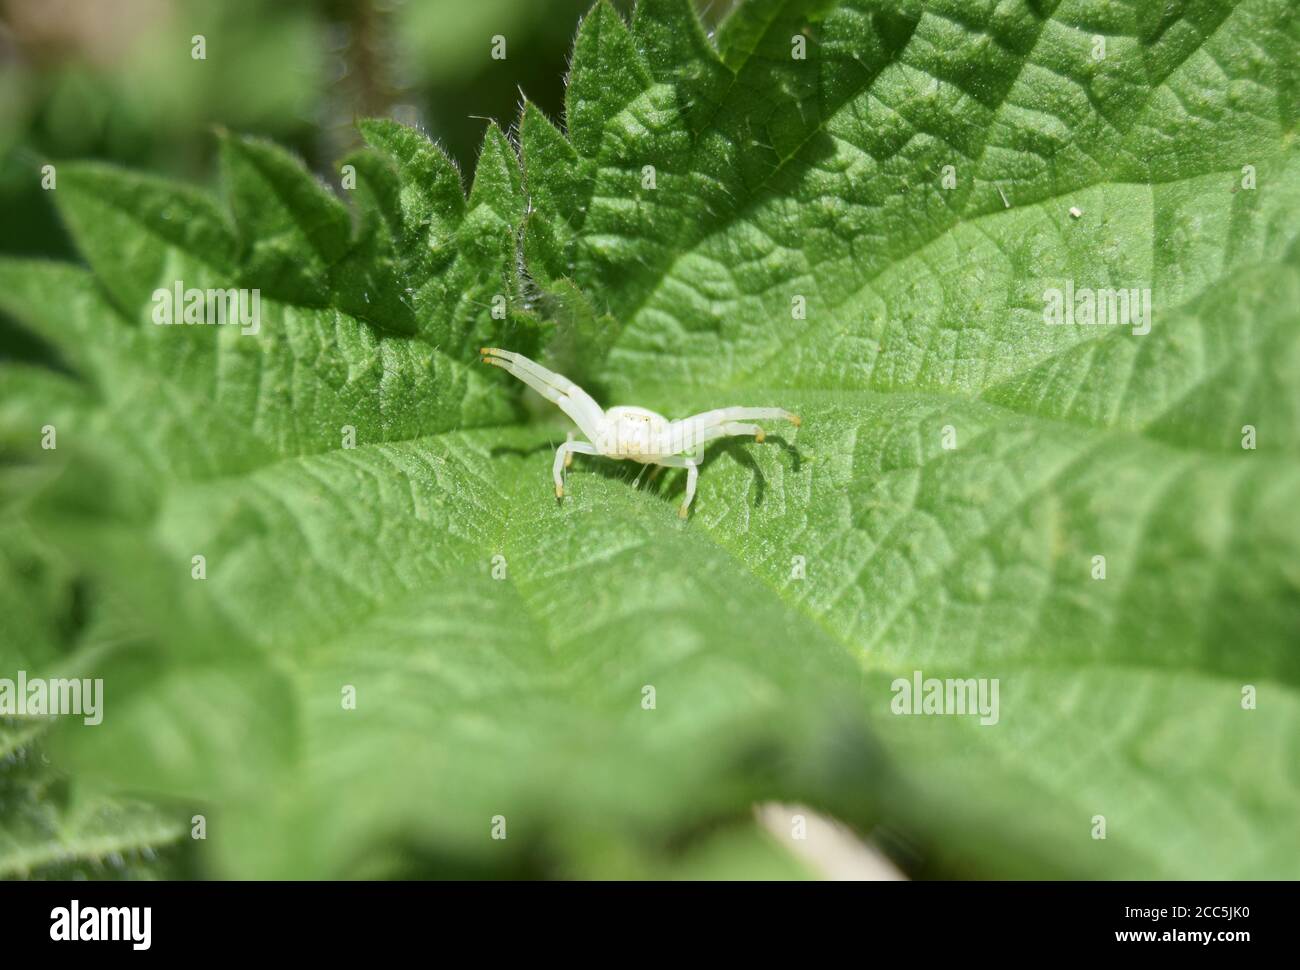 Crab Spider on nettle leaf Stock Photo